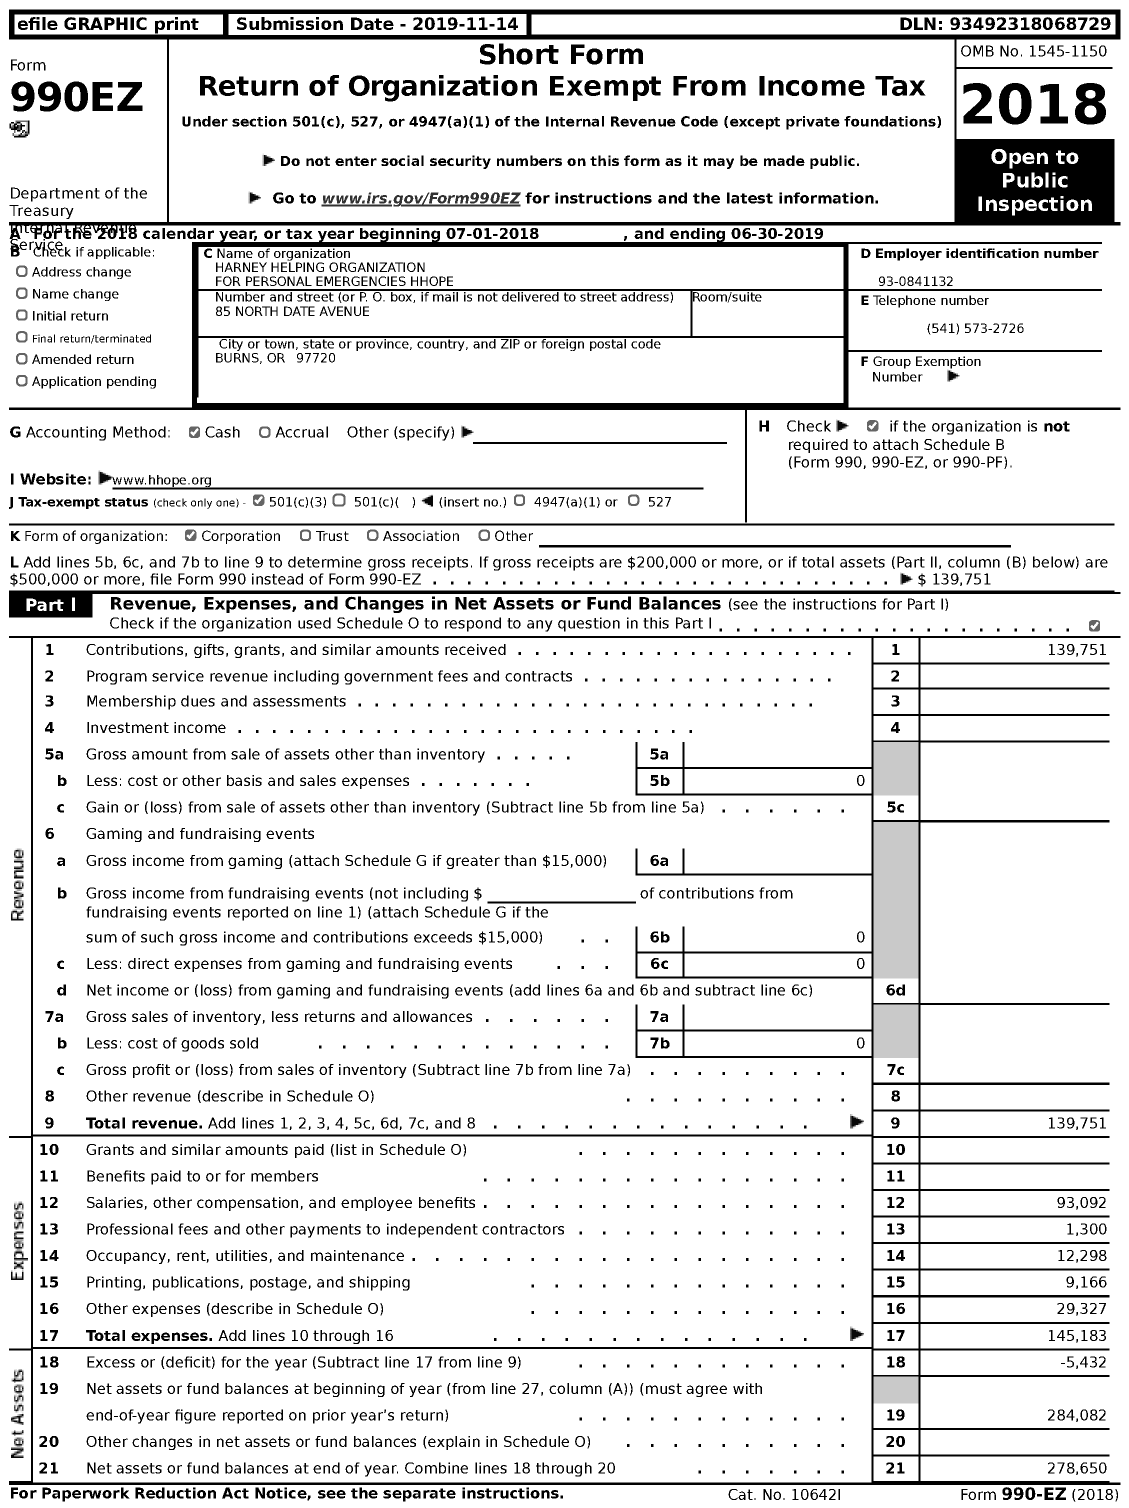 Image of first page of 2018 Form 990EZ for Harney Helping Organization for Personal Emergencies (HHOPE)